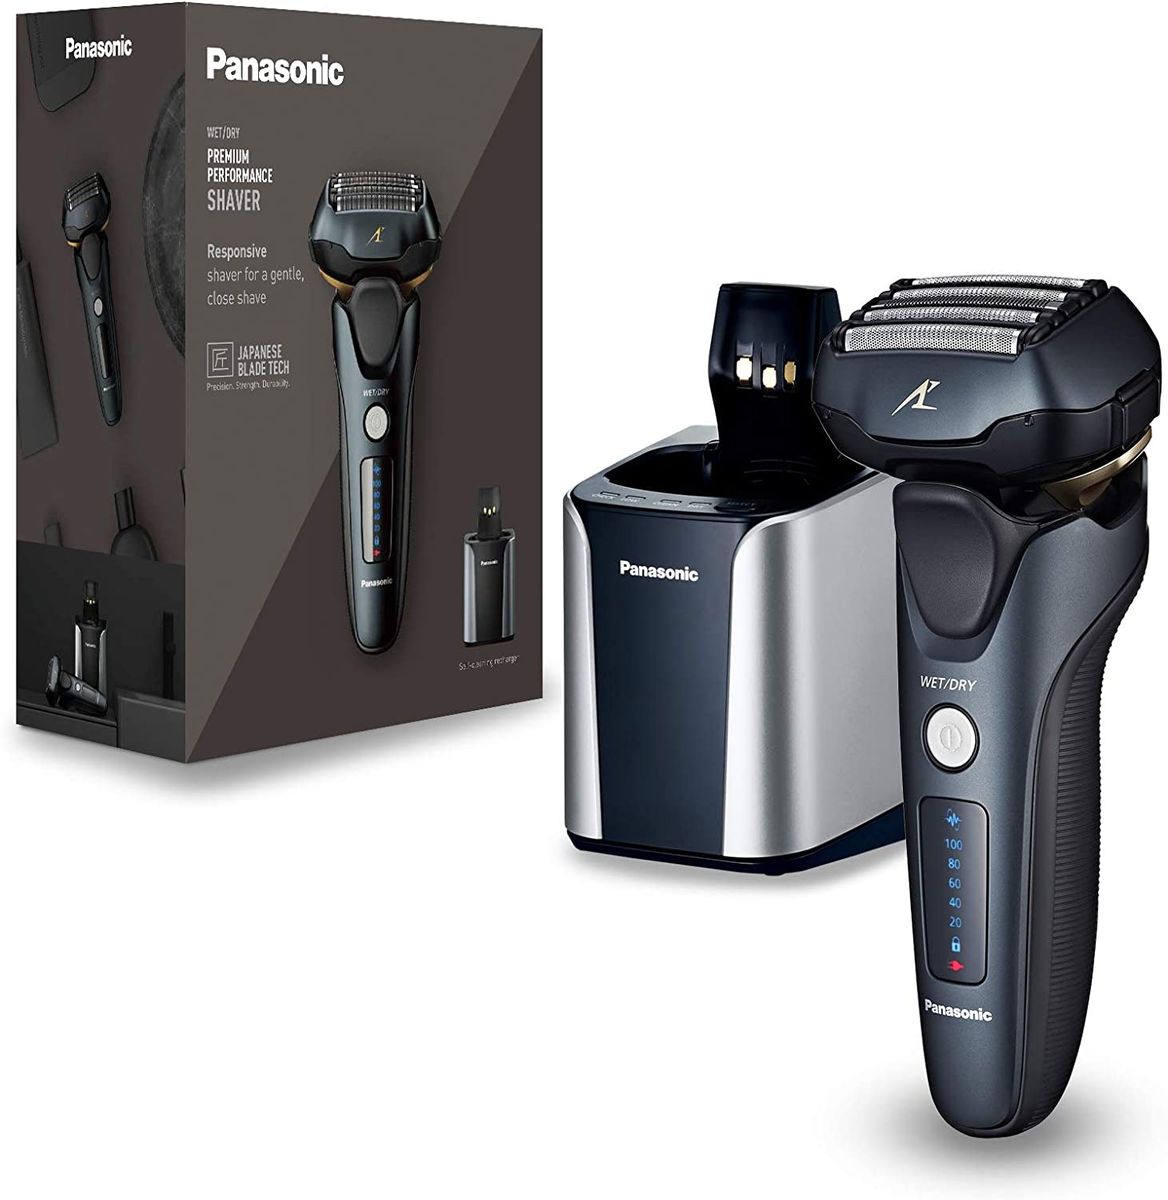 Panasonic ES-LV97-K803 wet/dry shaver, 5-position shaving head with linear motor, includes cleaning and charging station, black